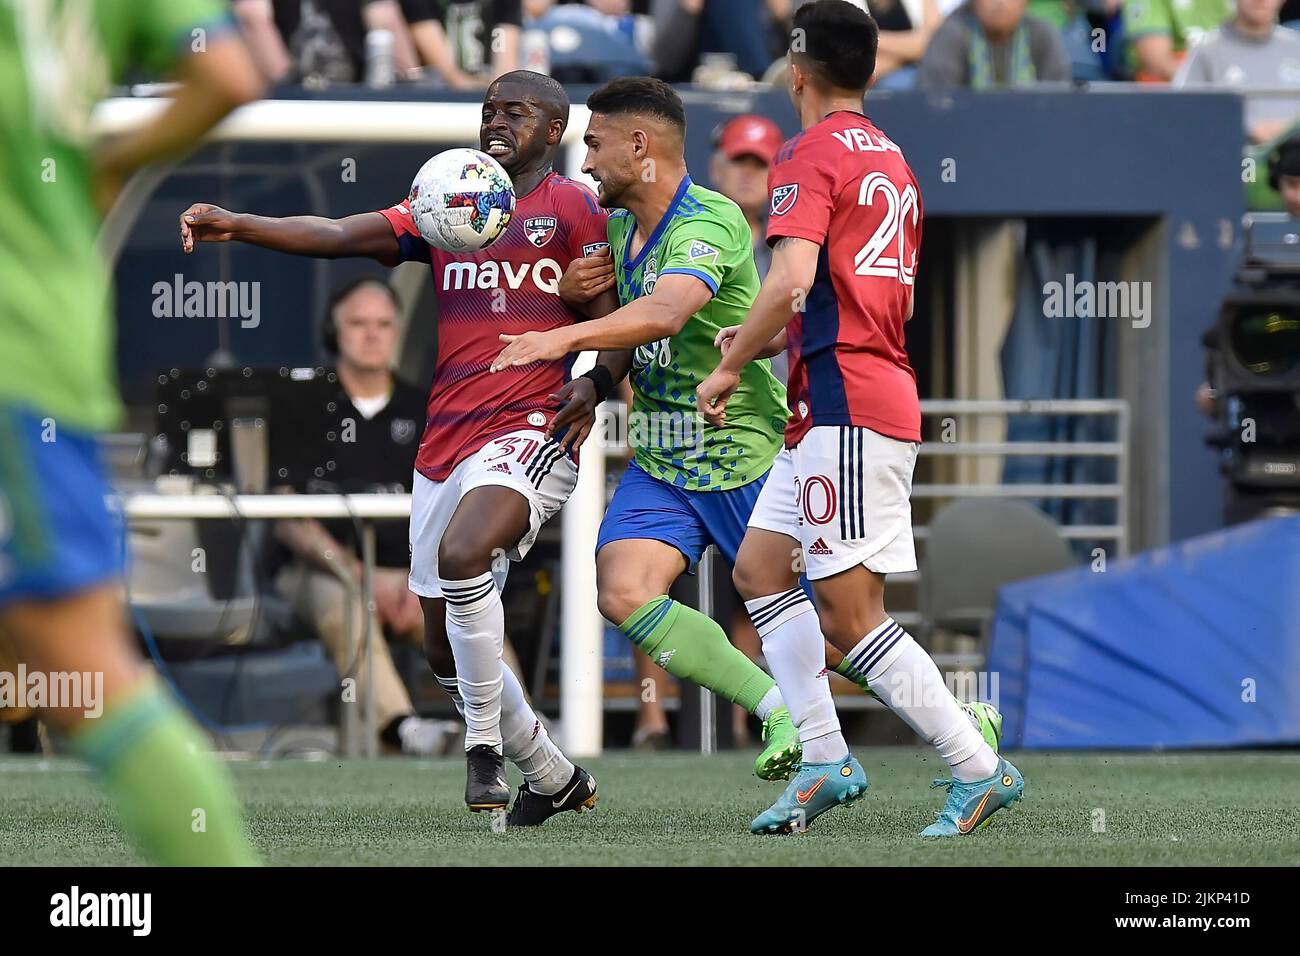 Seattle, Washington, USA. August 02, 2022: FC Dallas defender NanÃº (31) and Seattle Sounders midfielder Cristian Roldan (7) during the first half of the MLS soccer match between FC Dallas and Seattle Sounders FC at Lumen Field in Seattle, WA. Seattle defeated Dallas 1-0. Steve Faber/CSM Credit: Cal Sport Media/Alamy Live News Stock Photo